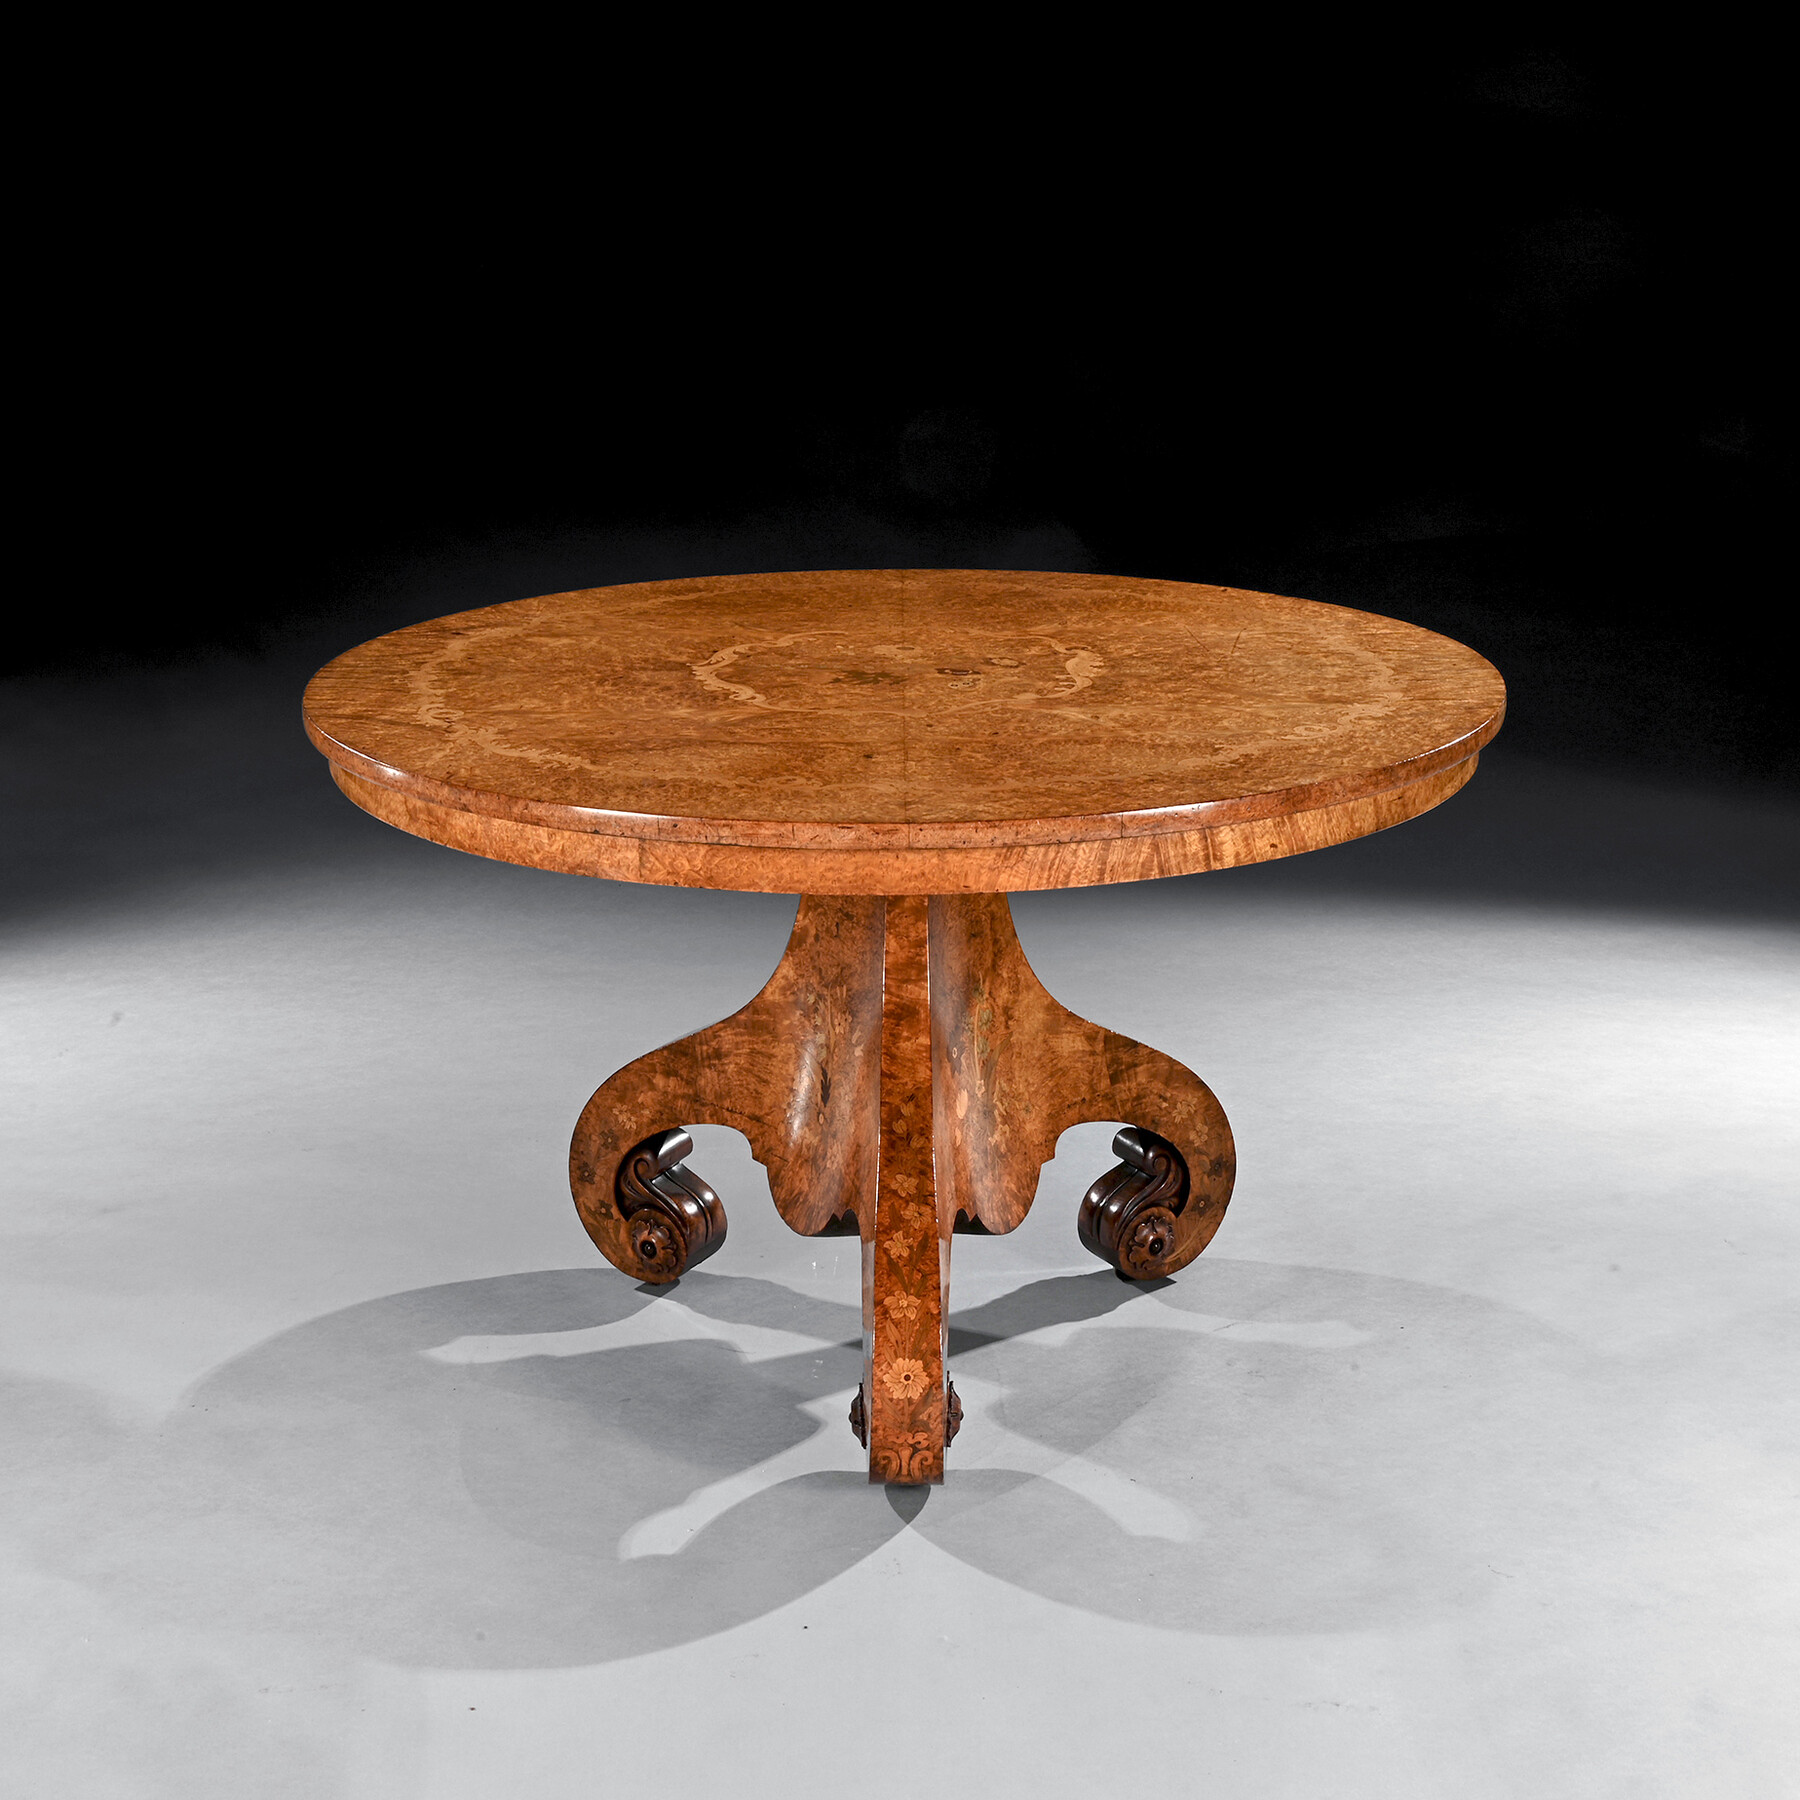 A Fine Burl Amboyna and Marquetry Centre Table Attributed to George Blake and Co and Probably Retailed by Edward Holmes Baldock